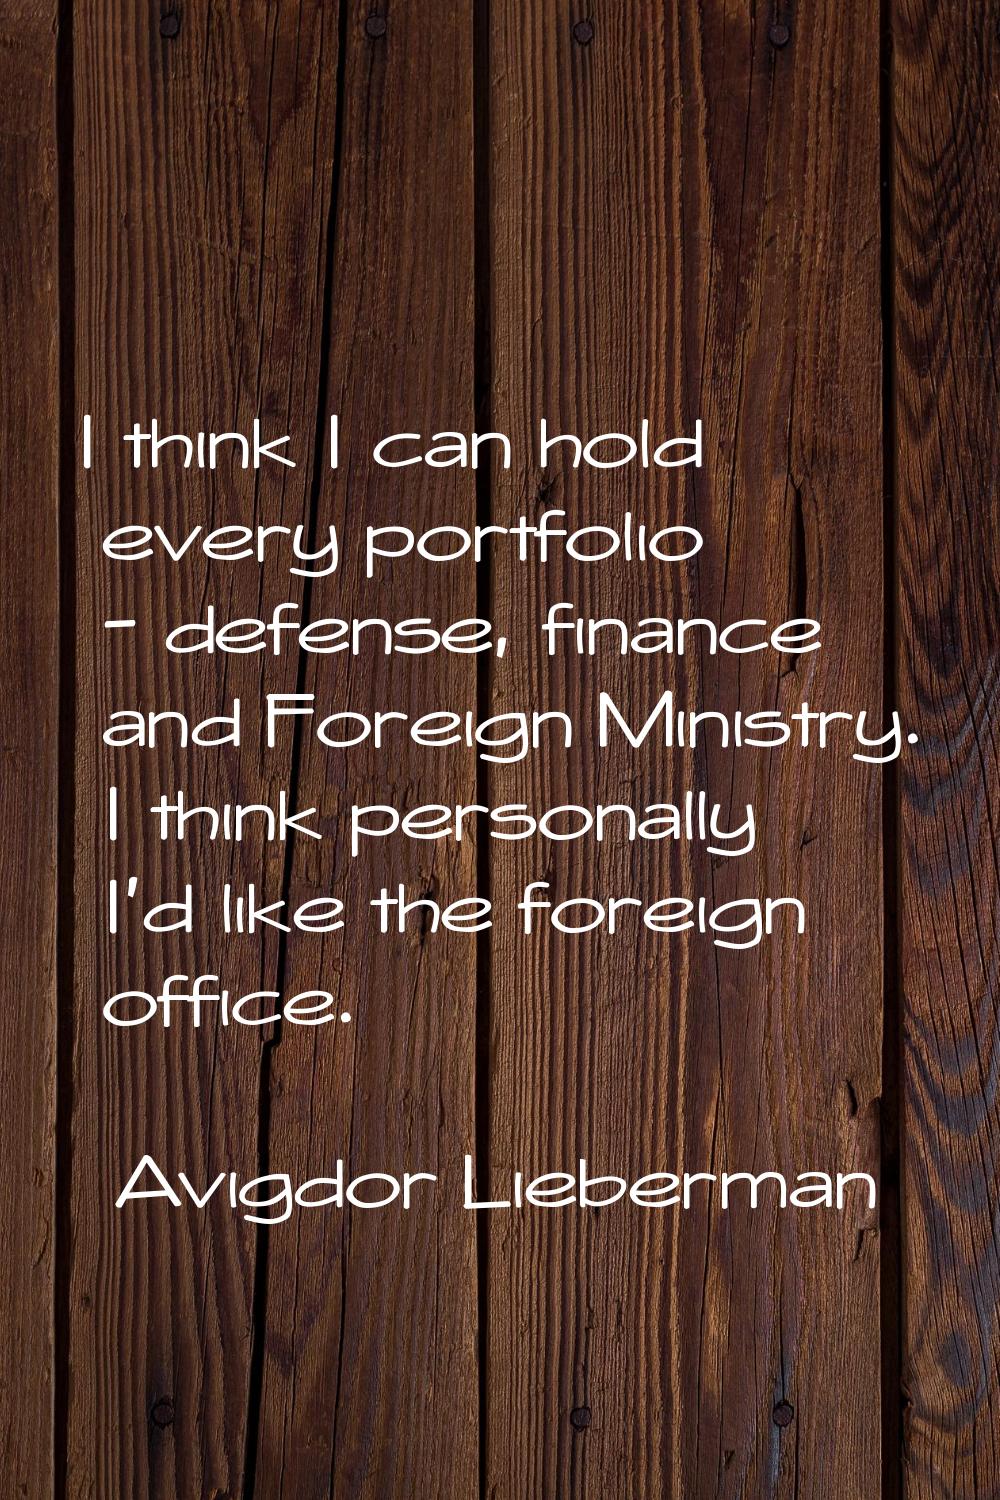 I think I can hold every portfolio - defense, finance and Foreign Ministry. I think personally I'd 